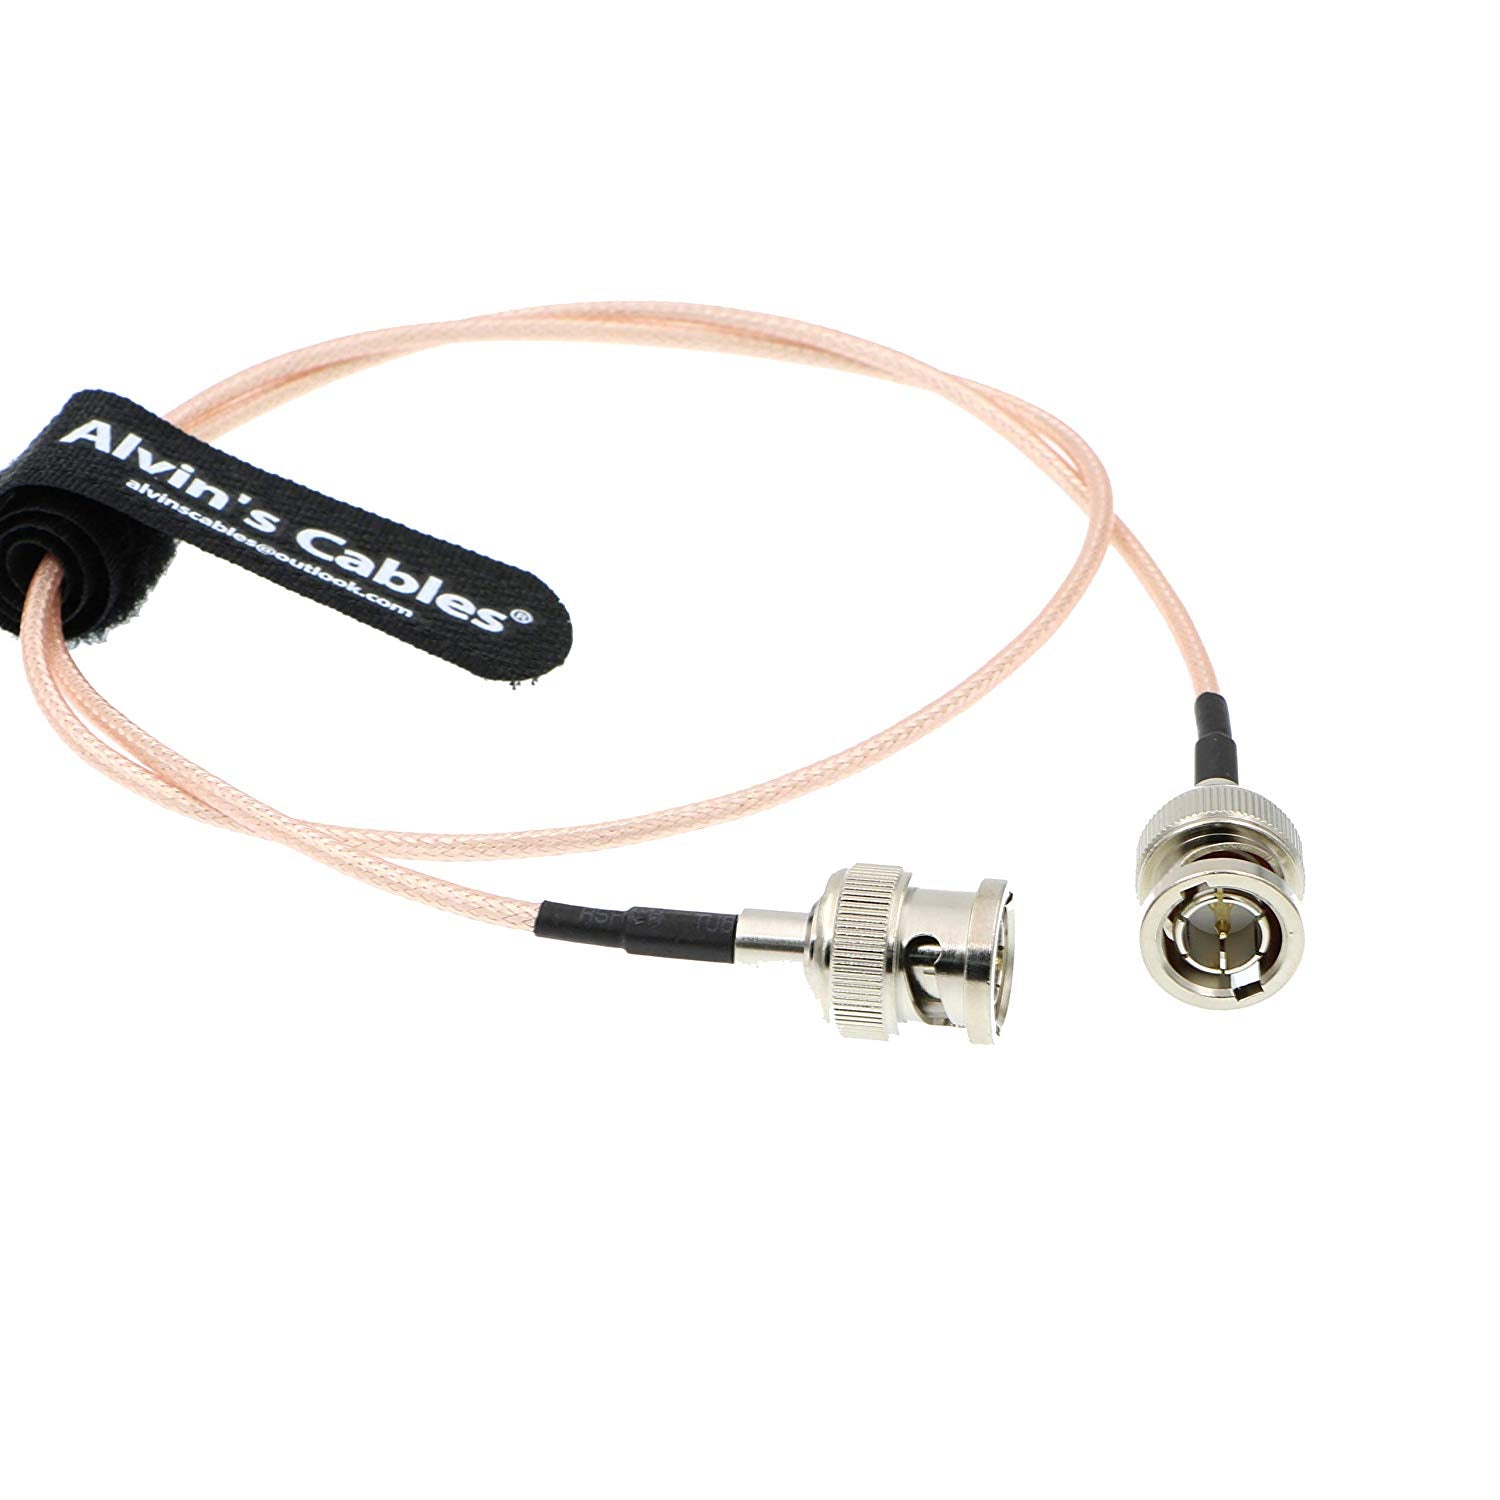 Alvin’s Cables HD SDI Video Cable BNC Male to Male for BMCC Video Out Blackmagic Camera